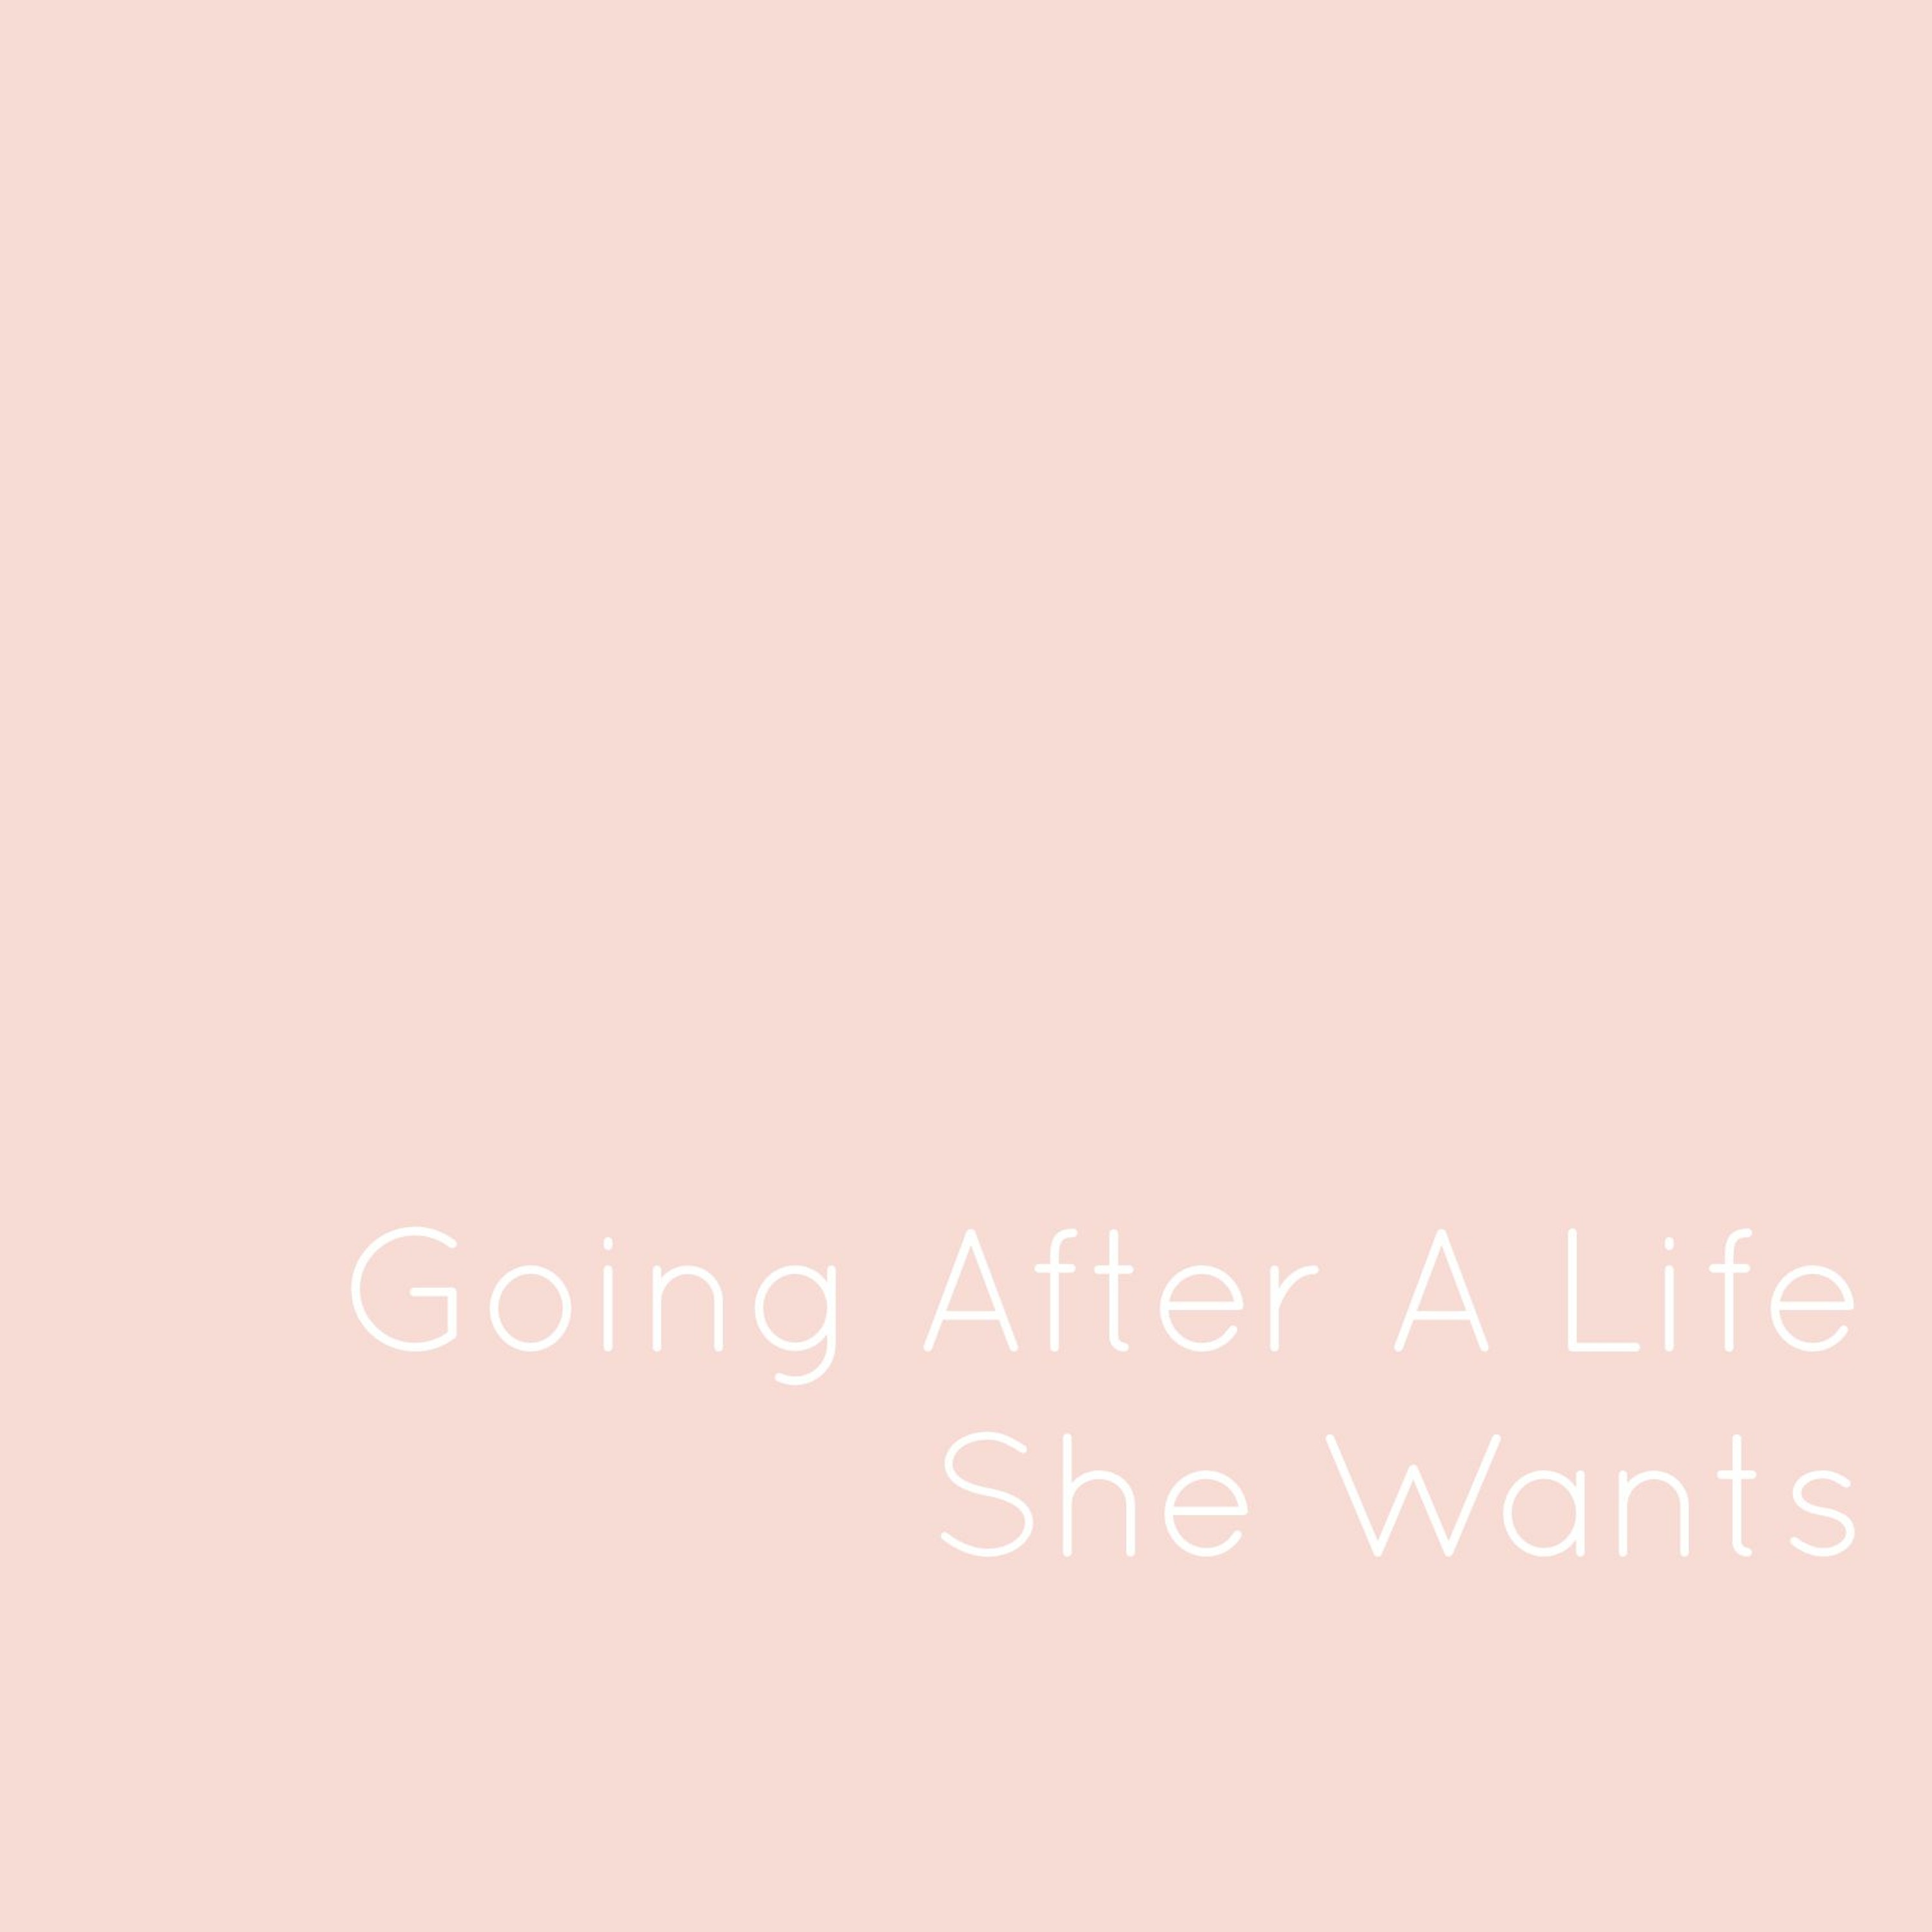 Ep 34: Going After A Life She Wants